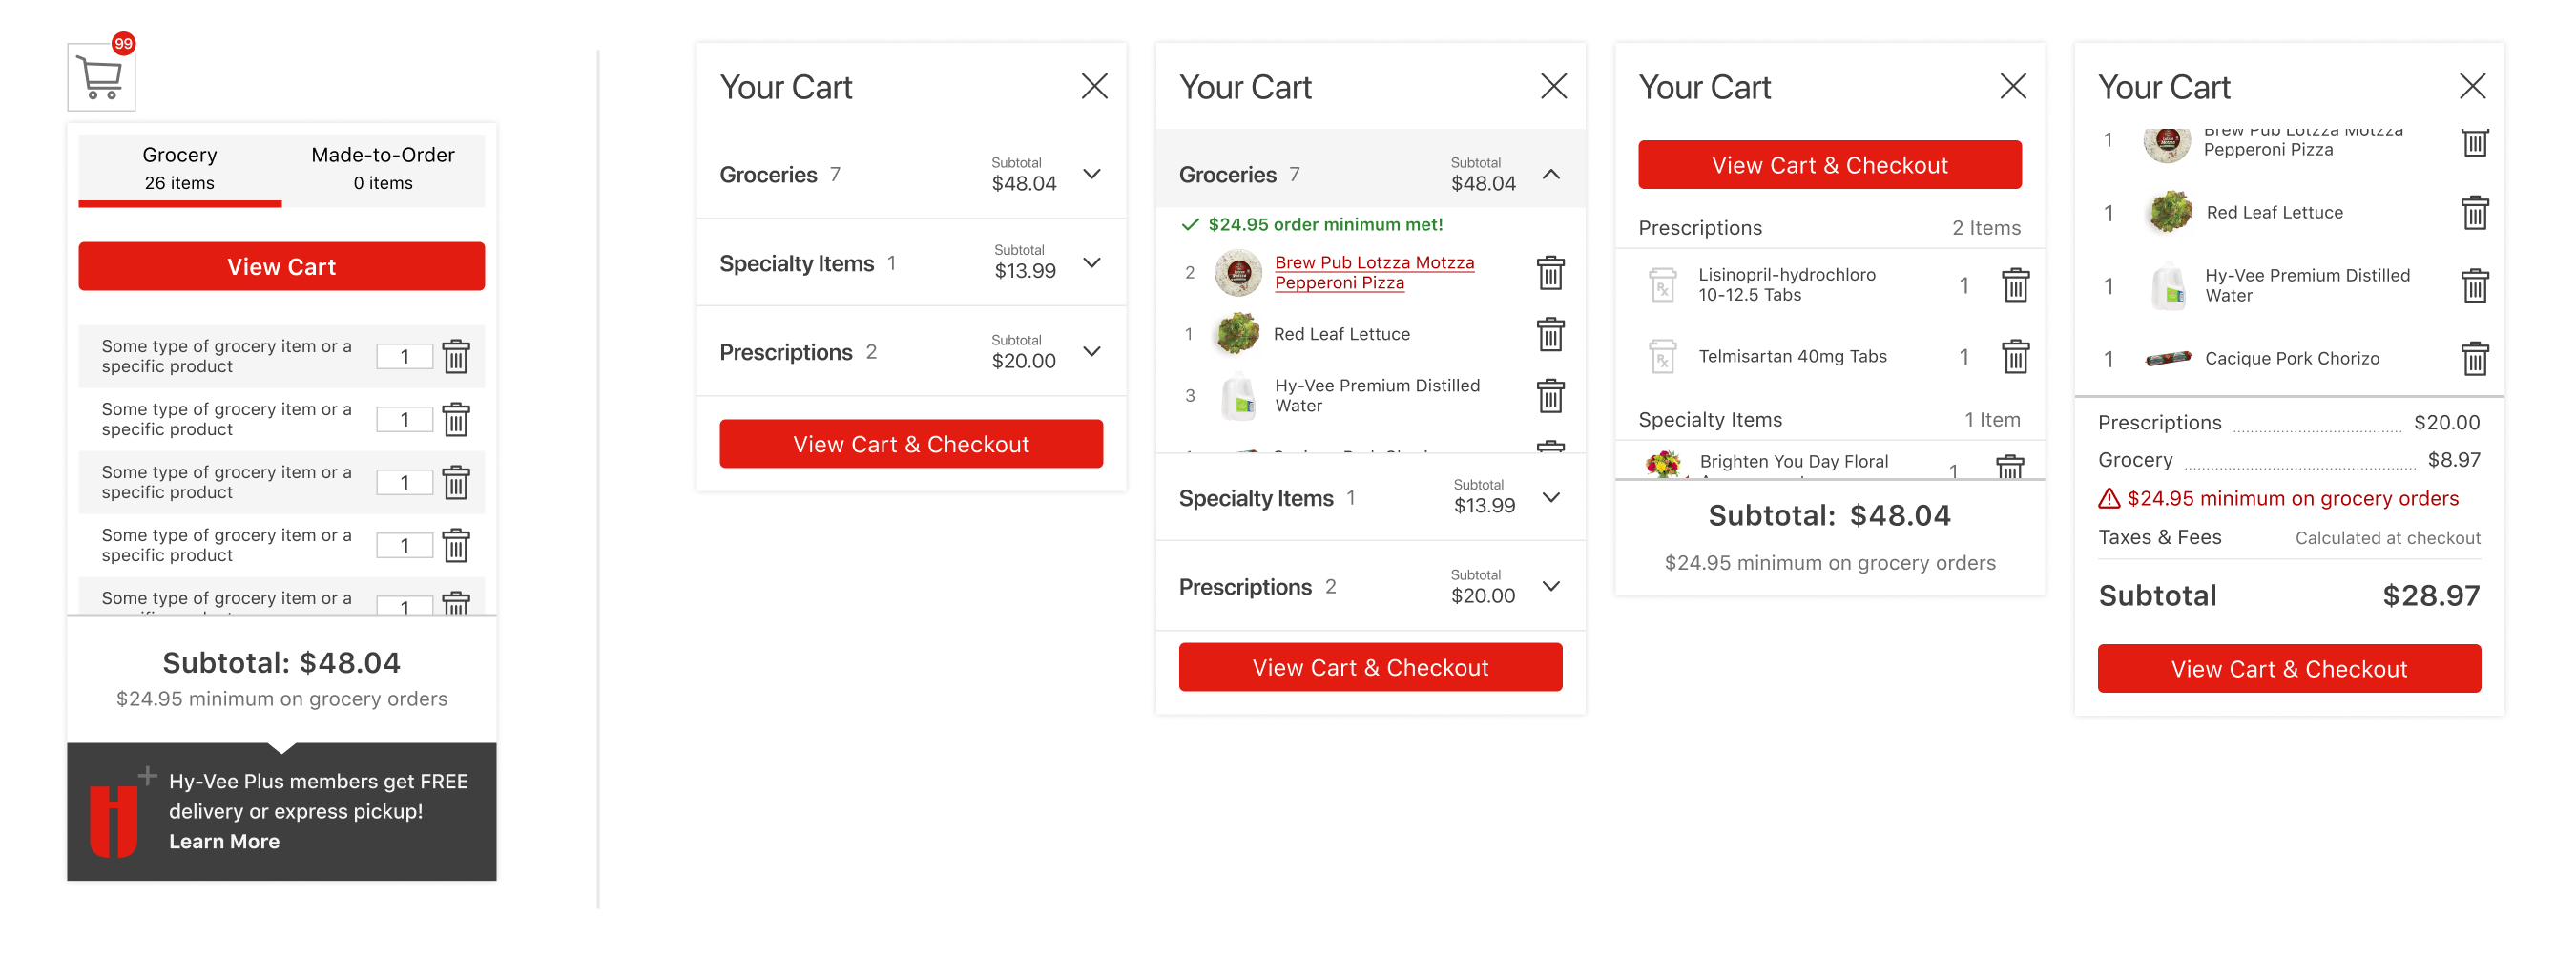 The current tabbed cart preview window compared to various concept ideas that combine the order catageories into a full cart snapshot.